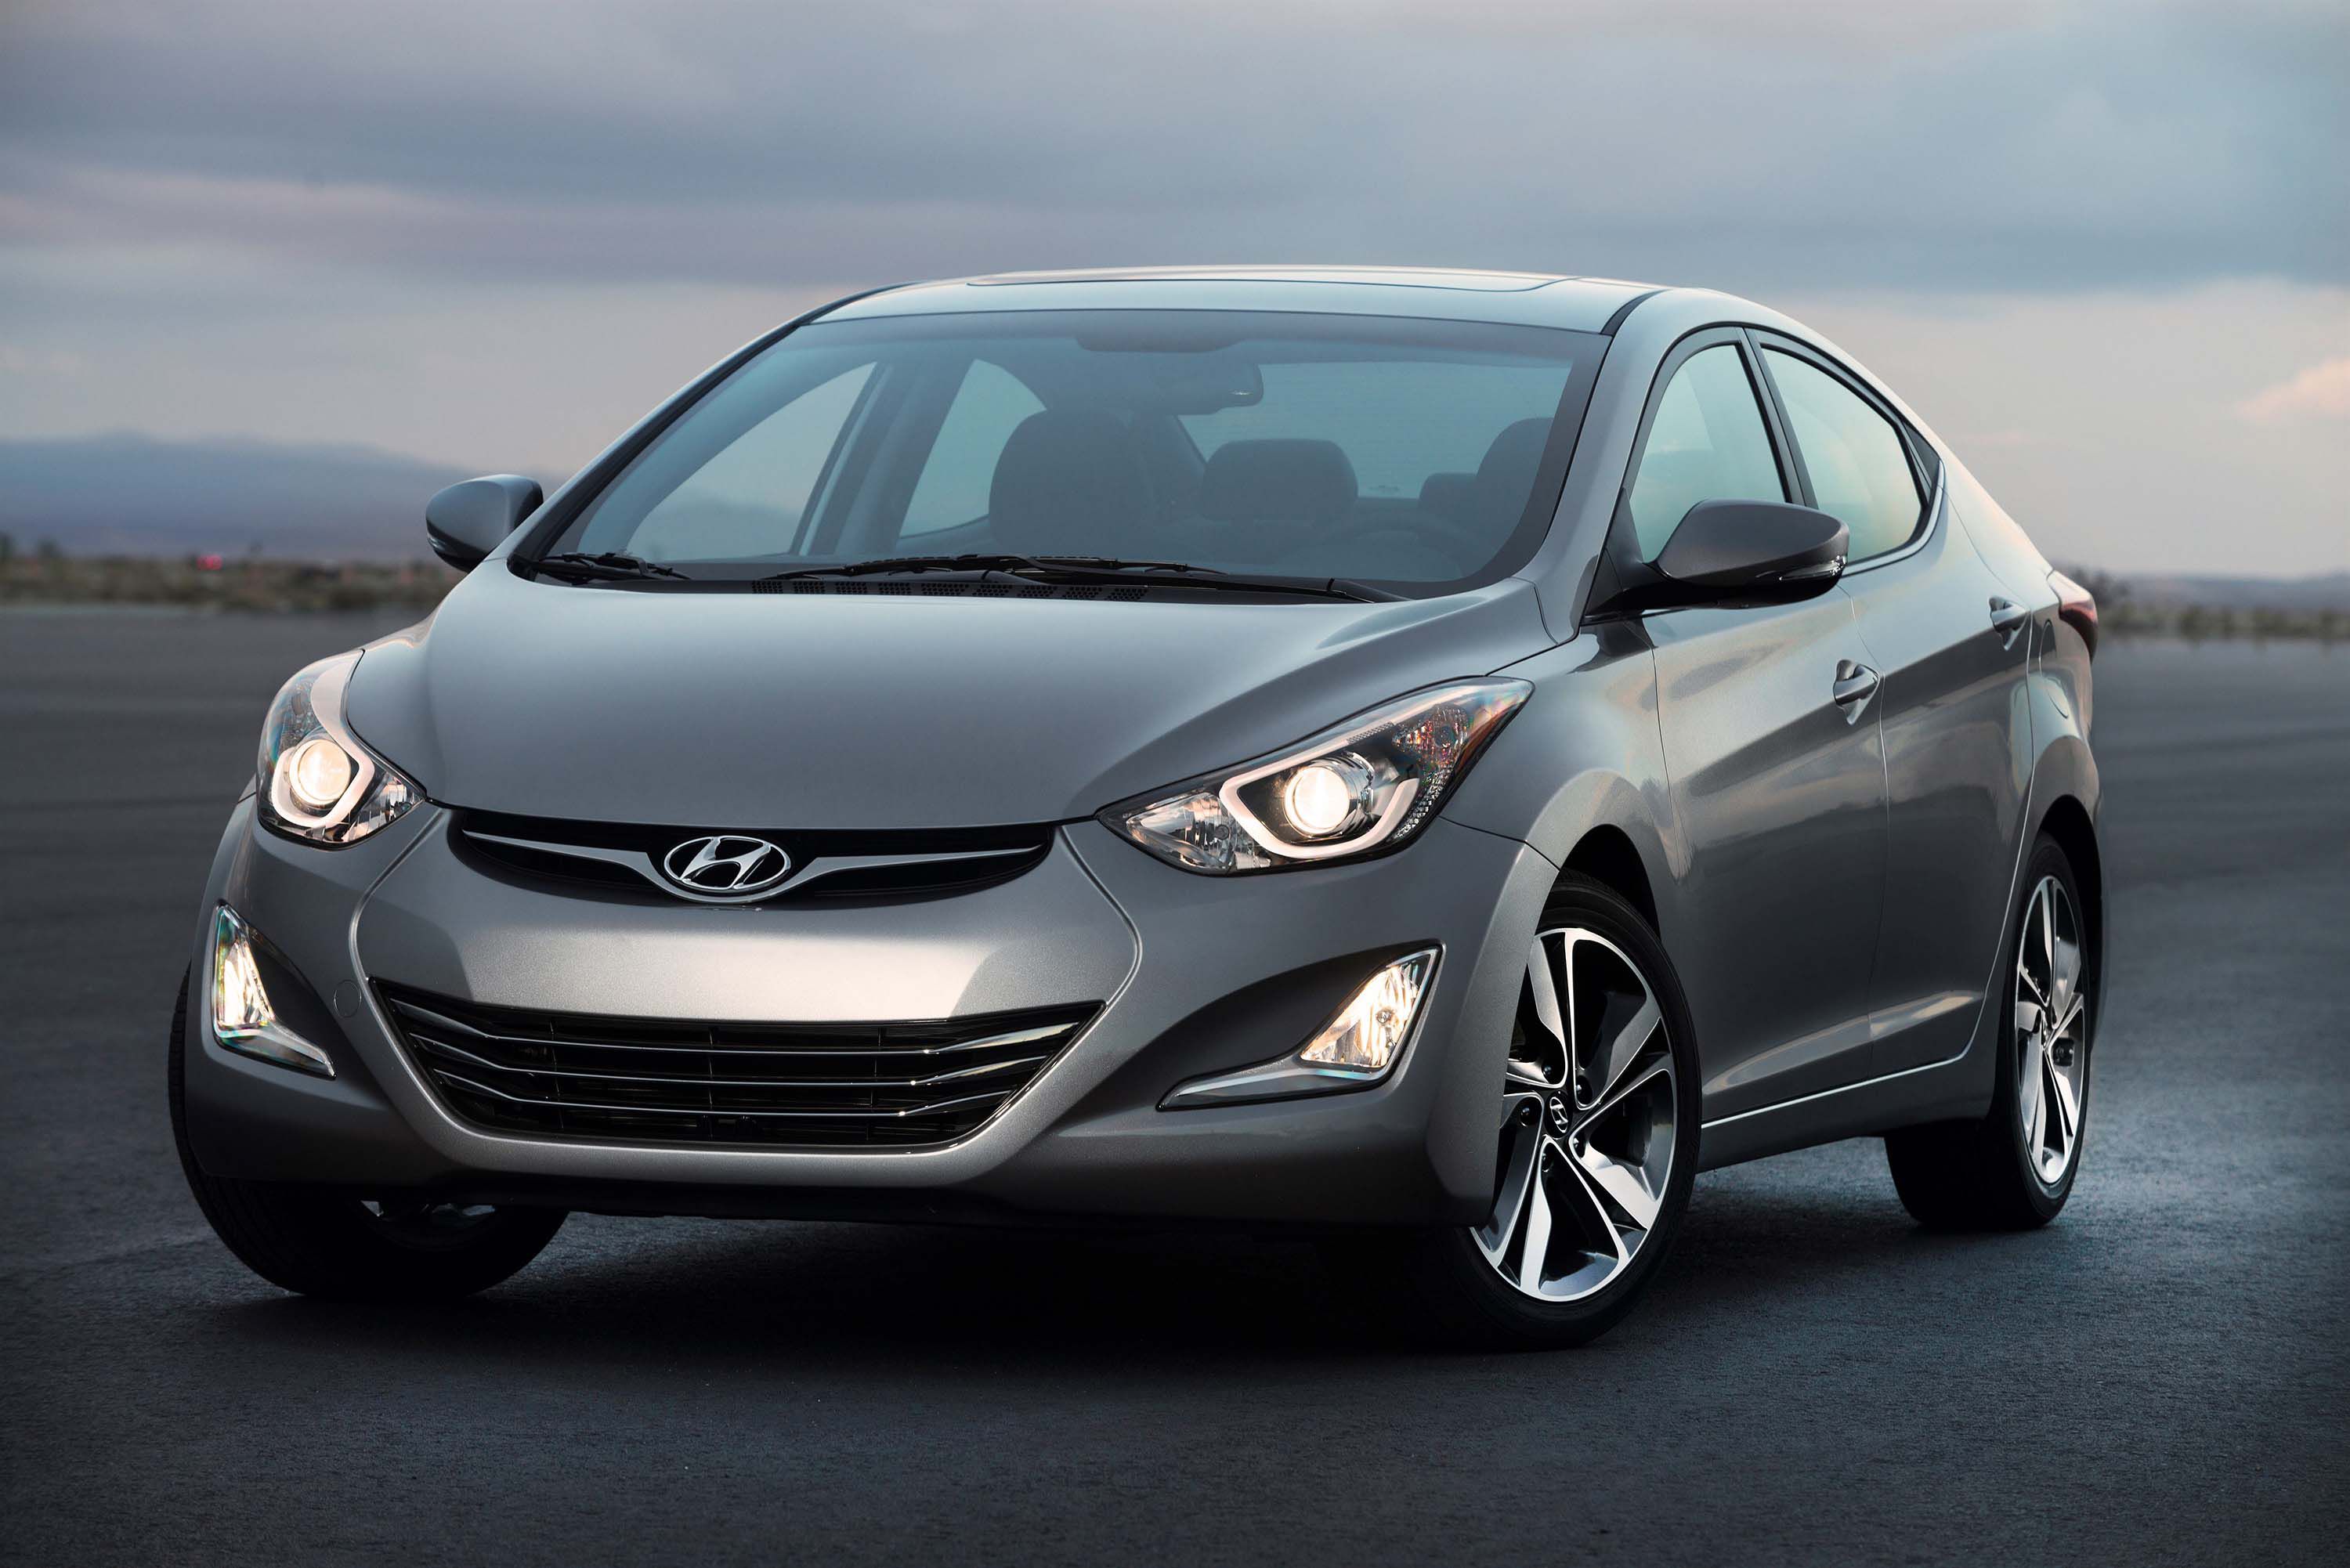 Auto review: For model year 2014, the Hyundai Elantra compact sedan  includes lots of design upgrades